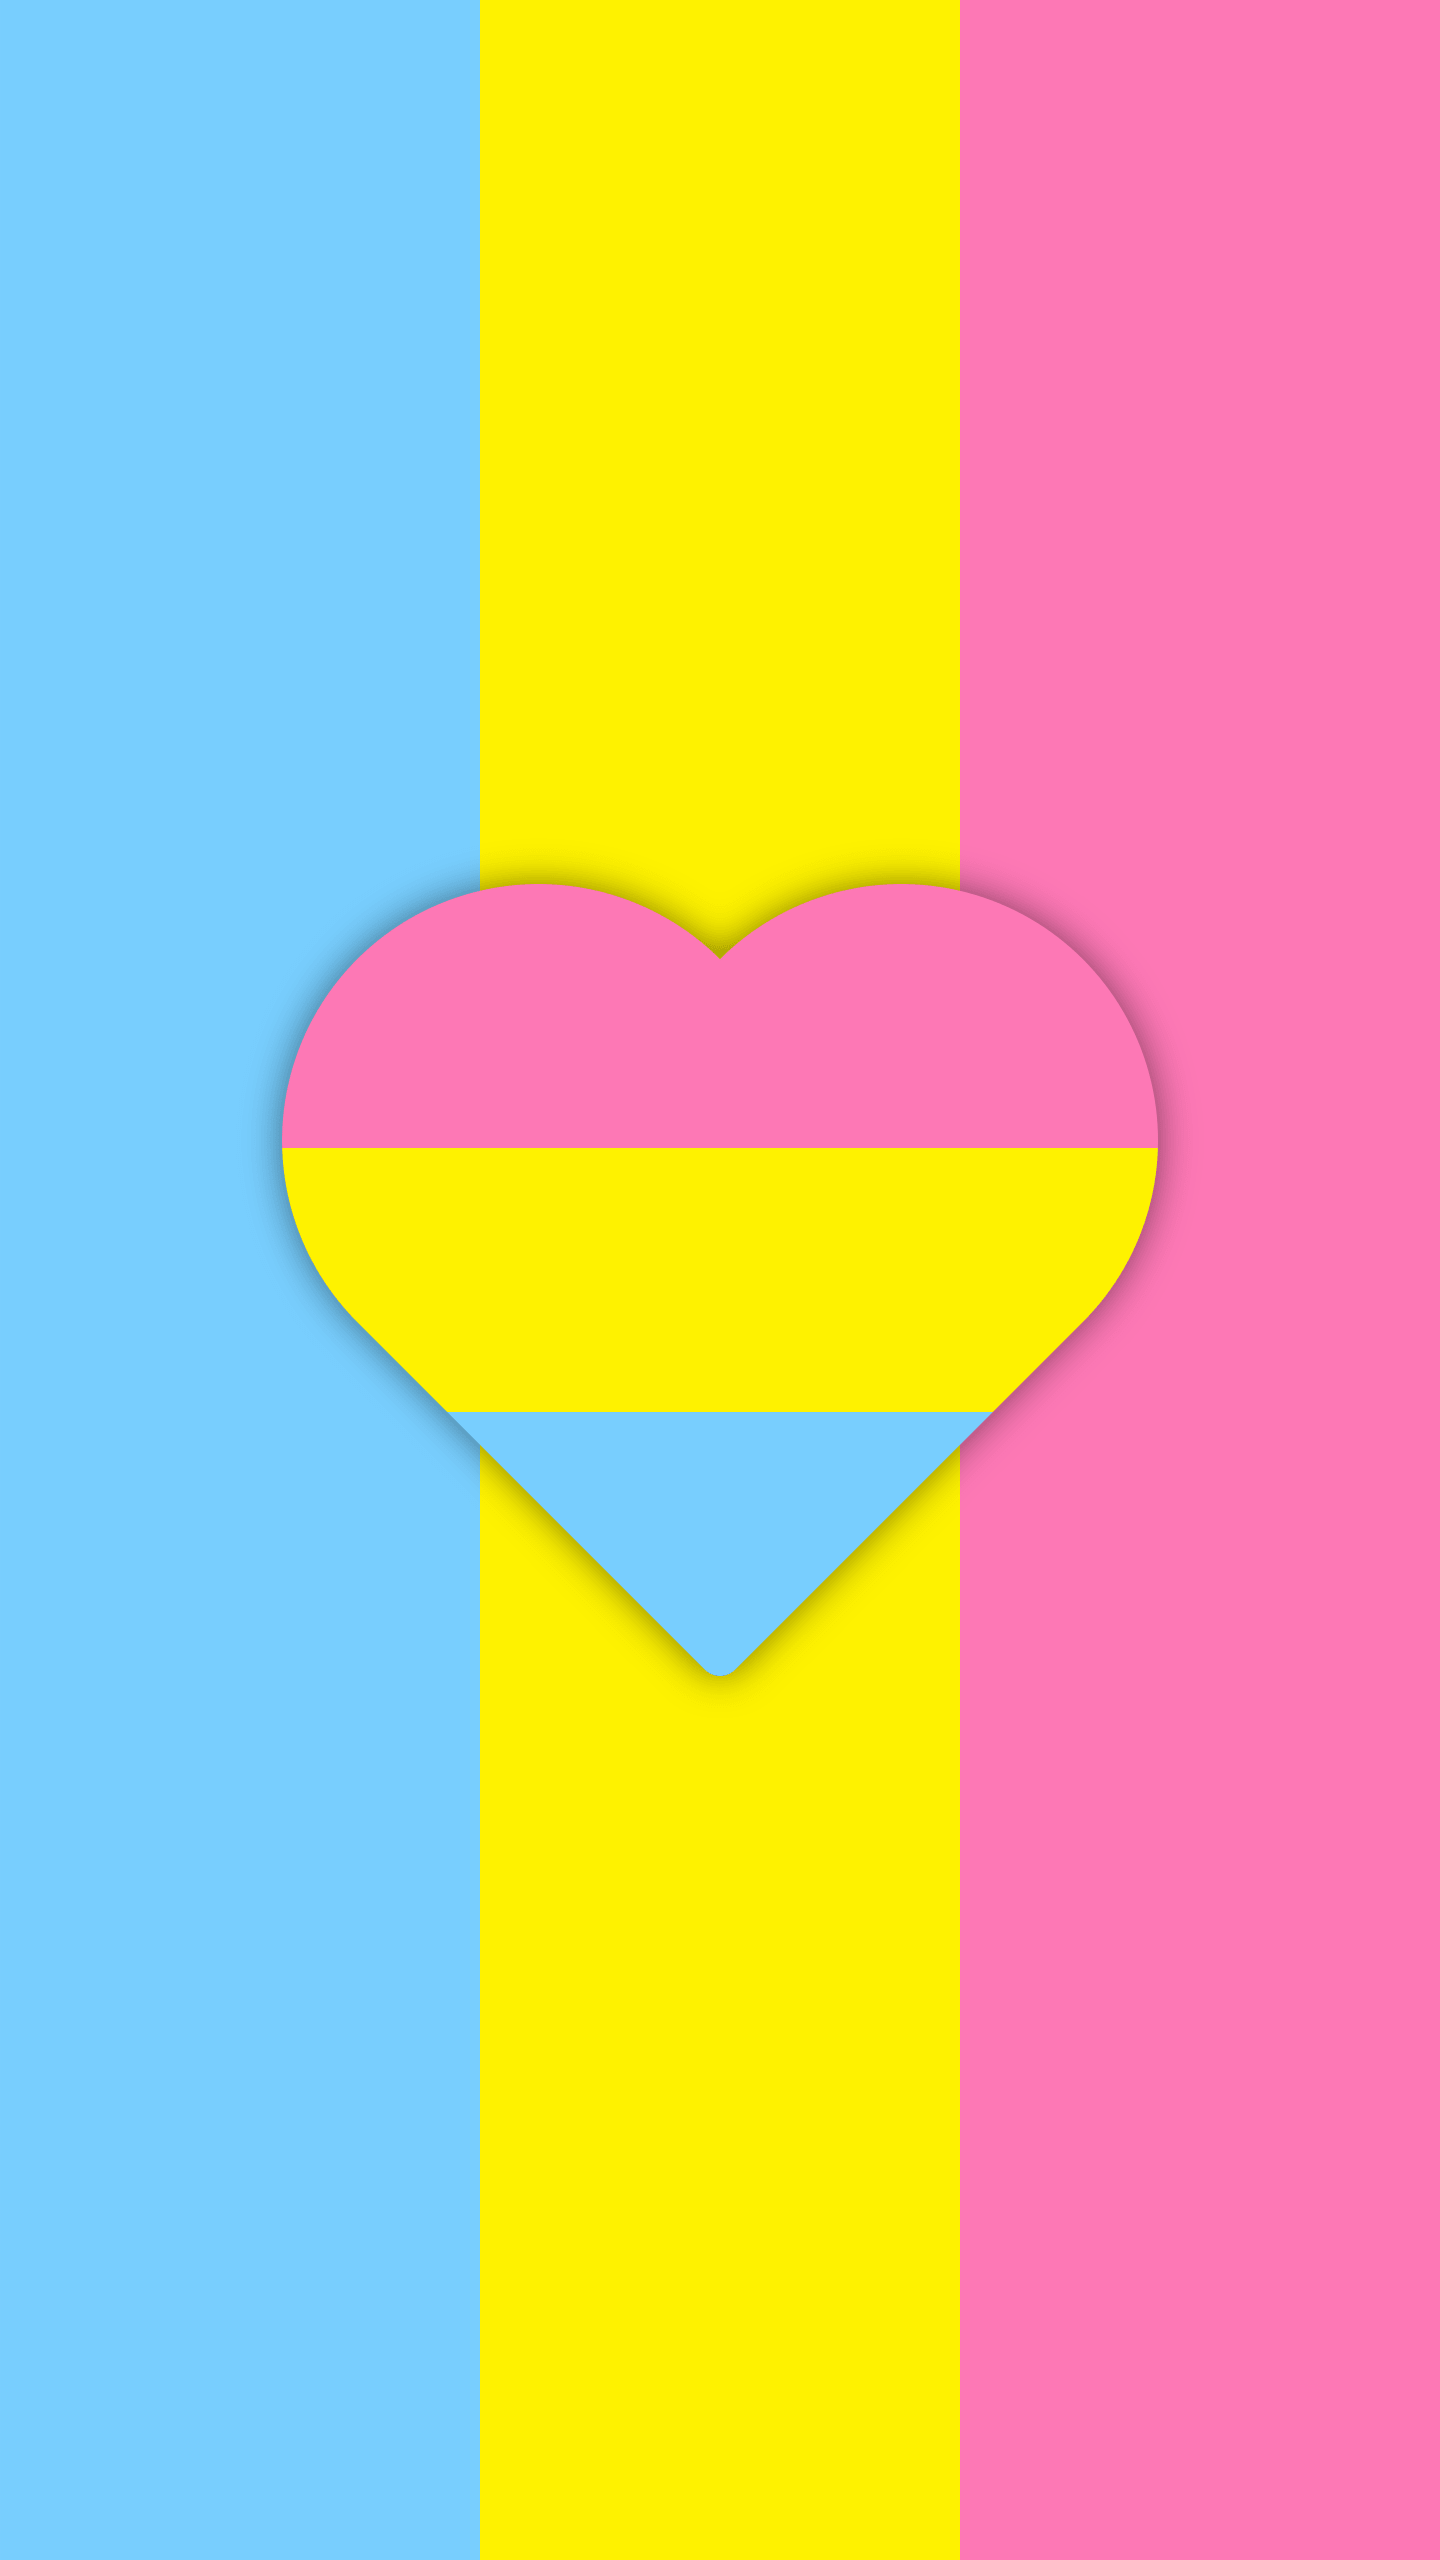 A rainbow flag with the heart in it - Pansexual